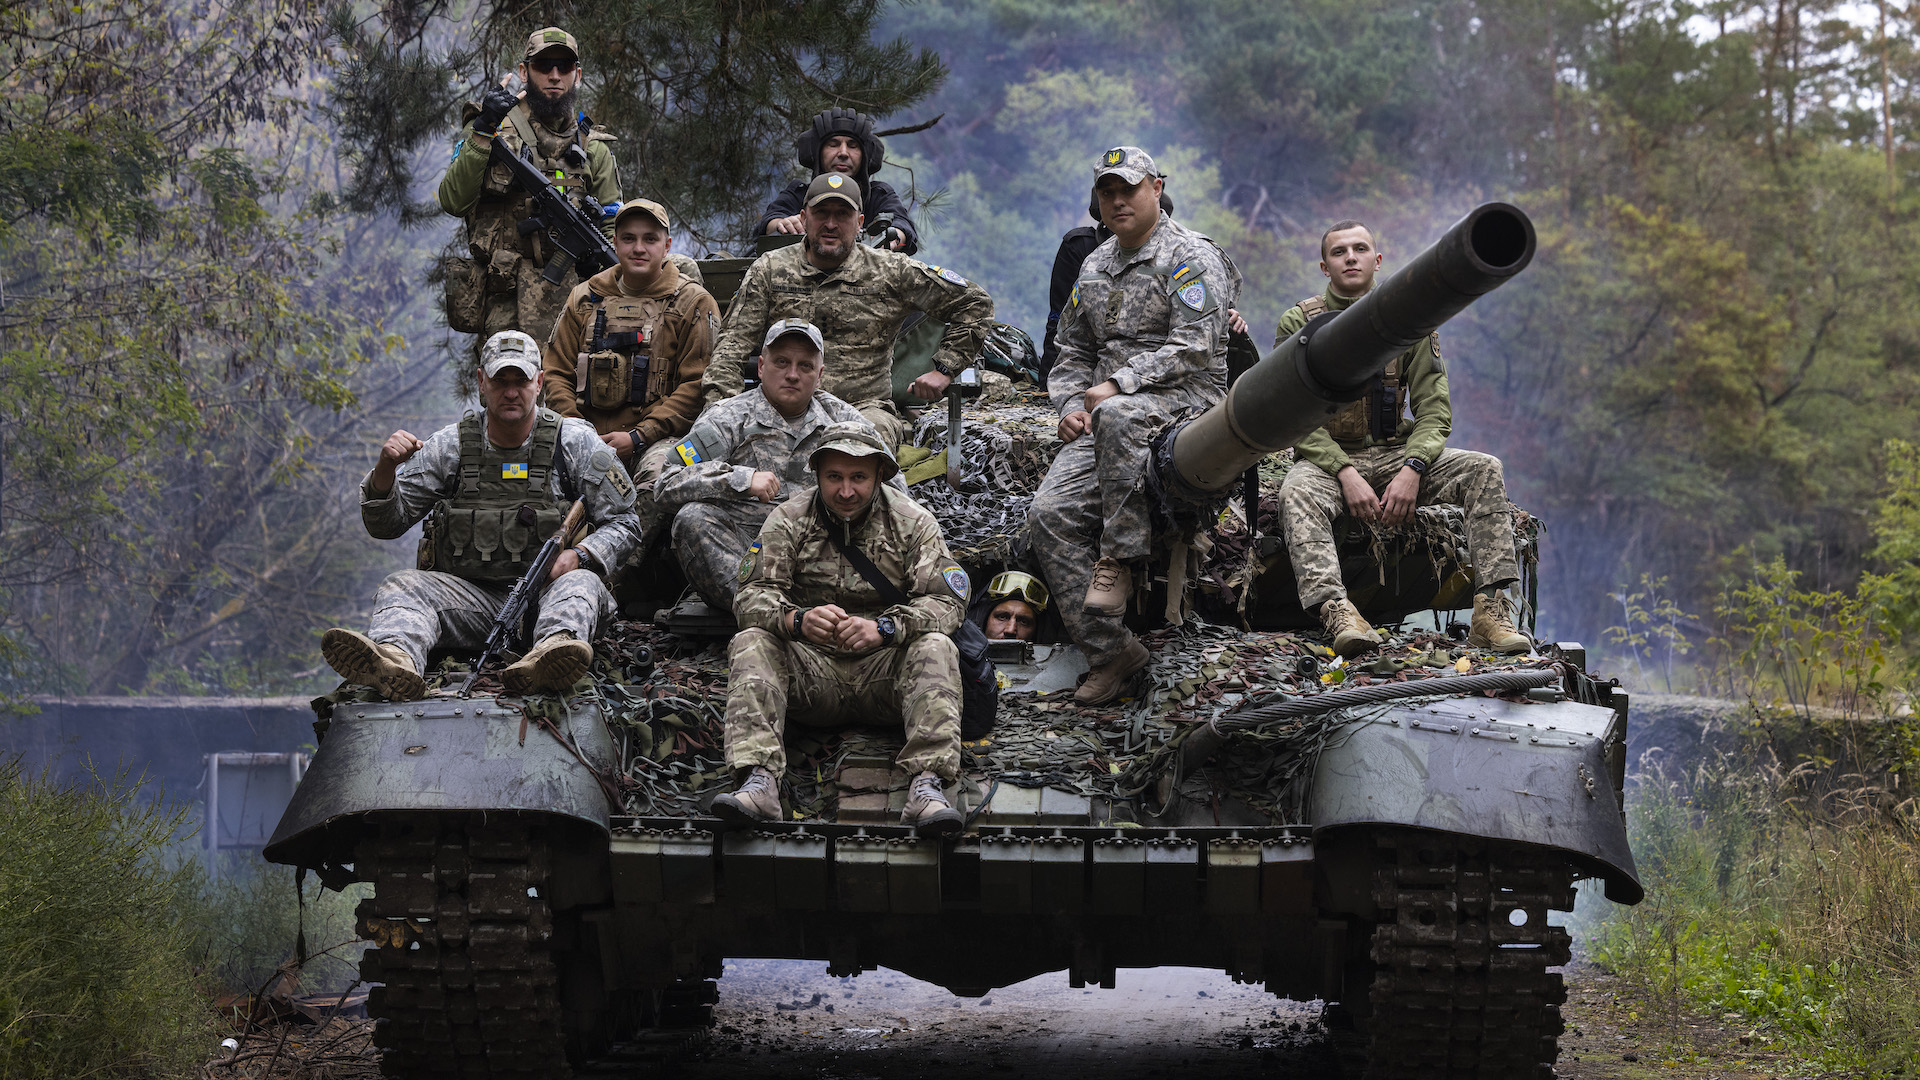 More than half of Ukraine’s tank fleet now reportedly consists of captured Russian armor